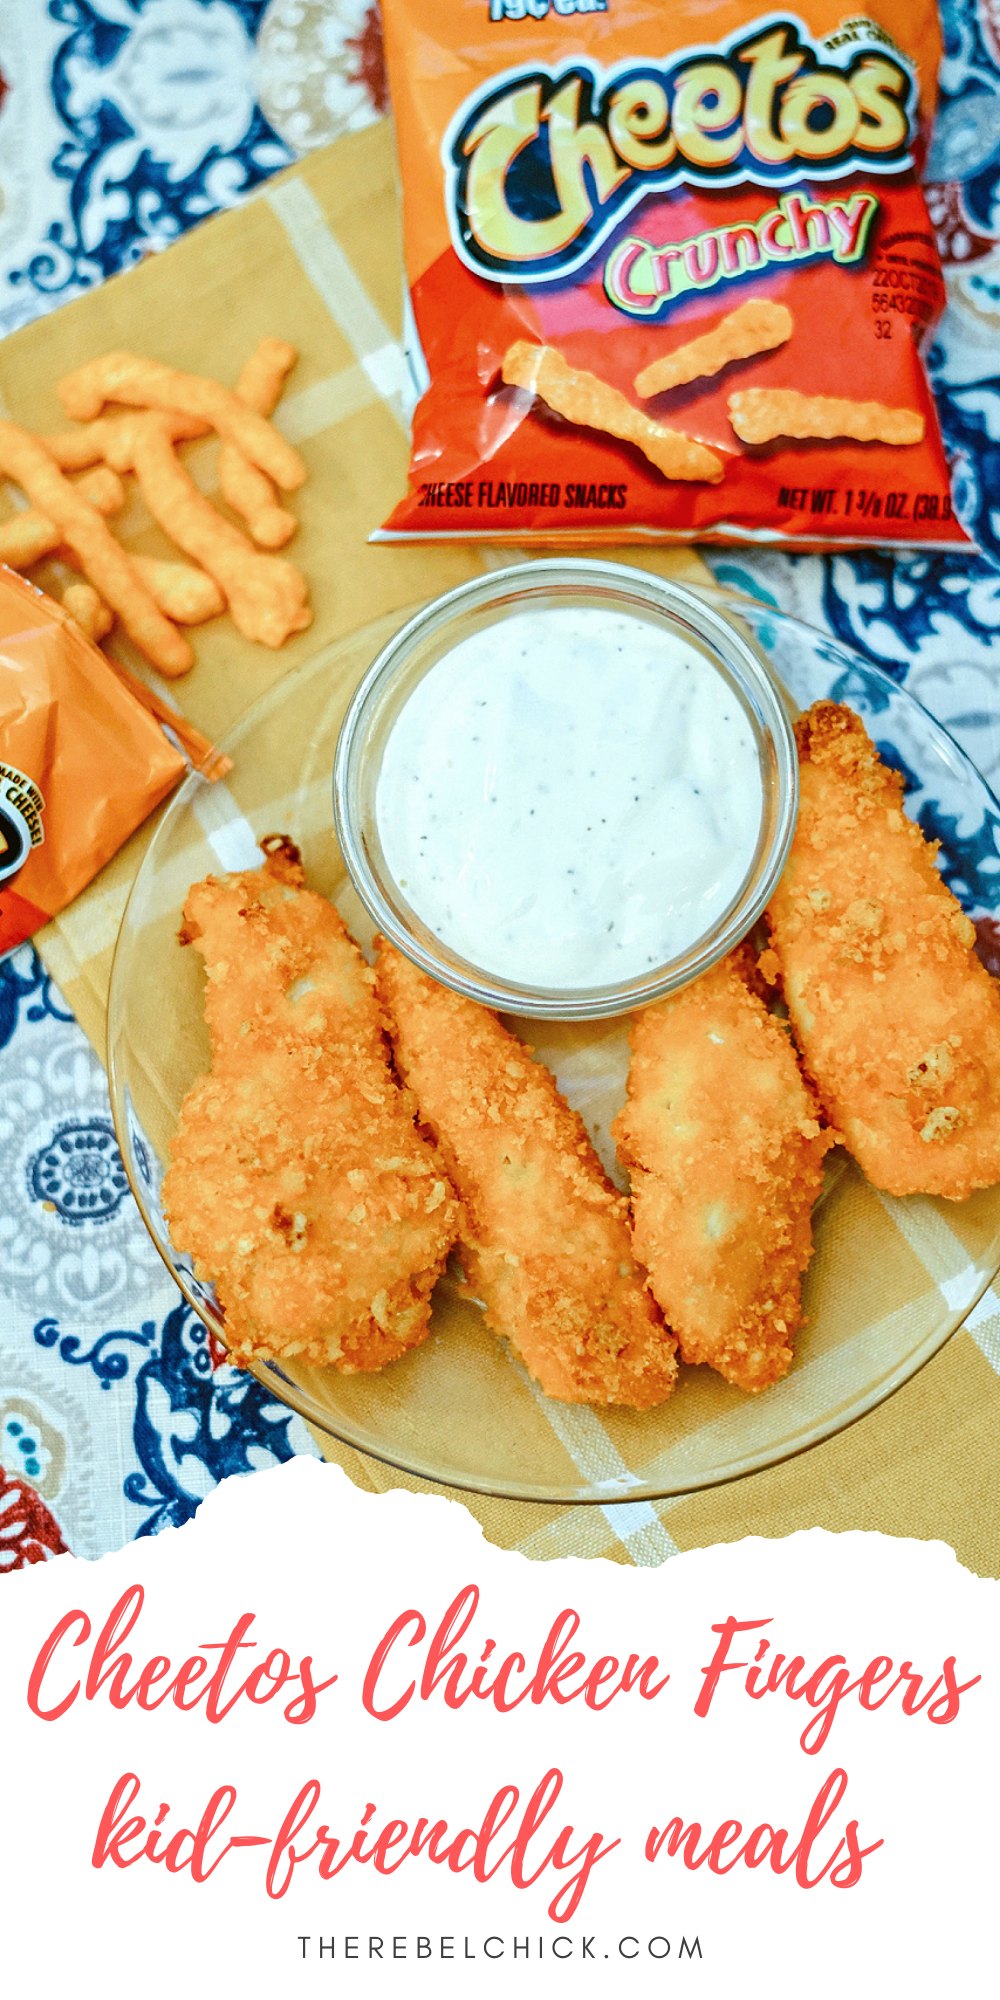 tenderloins with coating and a bowl of ranch dipping sauce